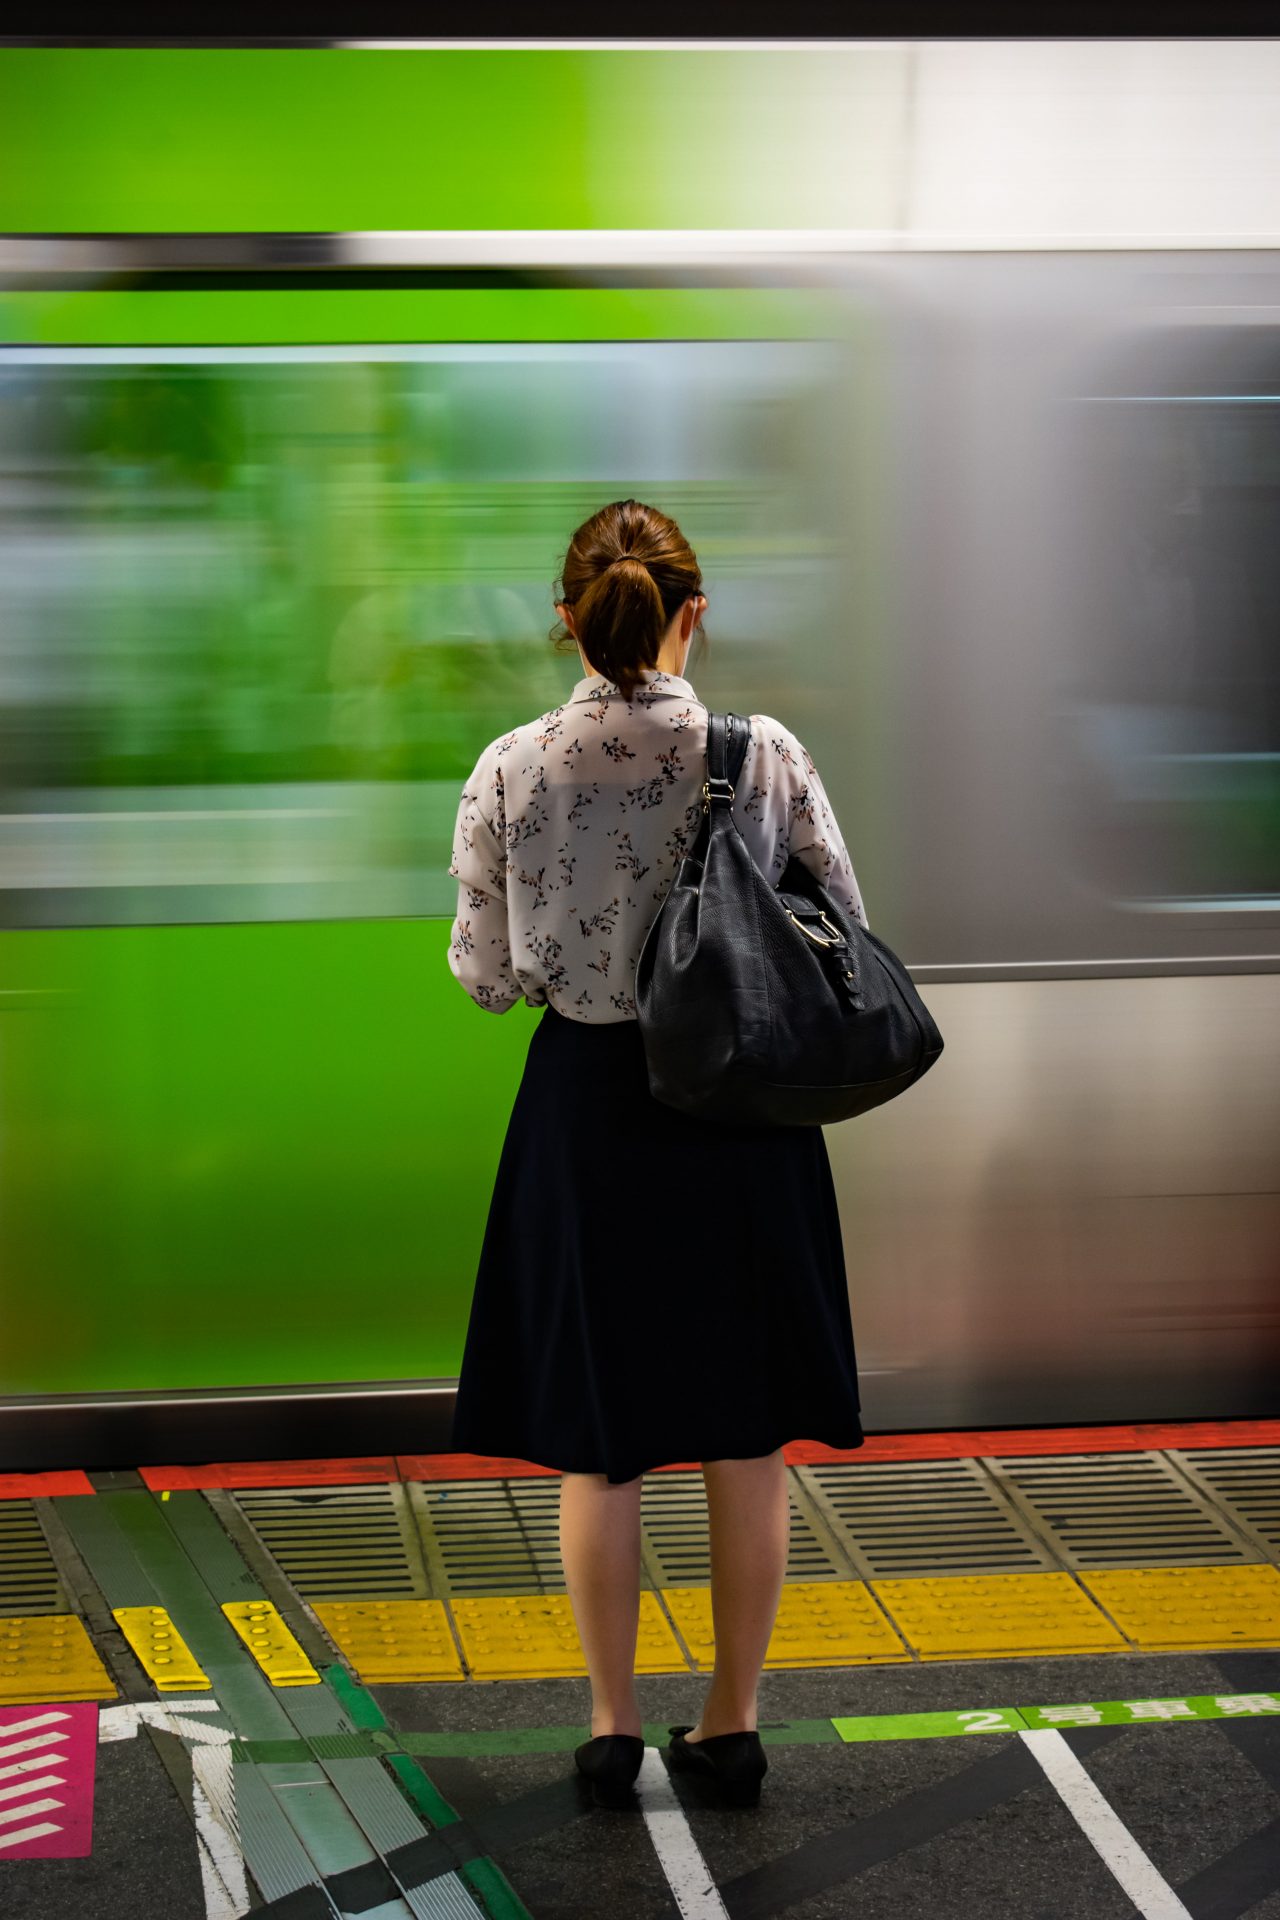 Woman waiting for the train in Tokyo